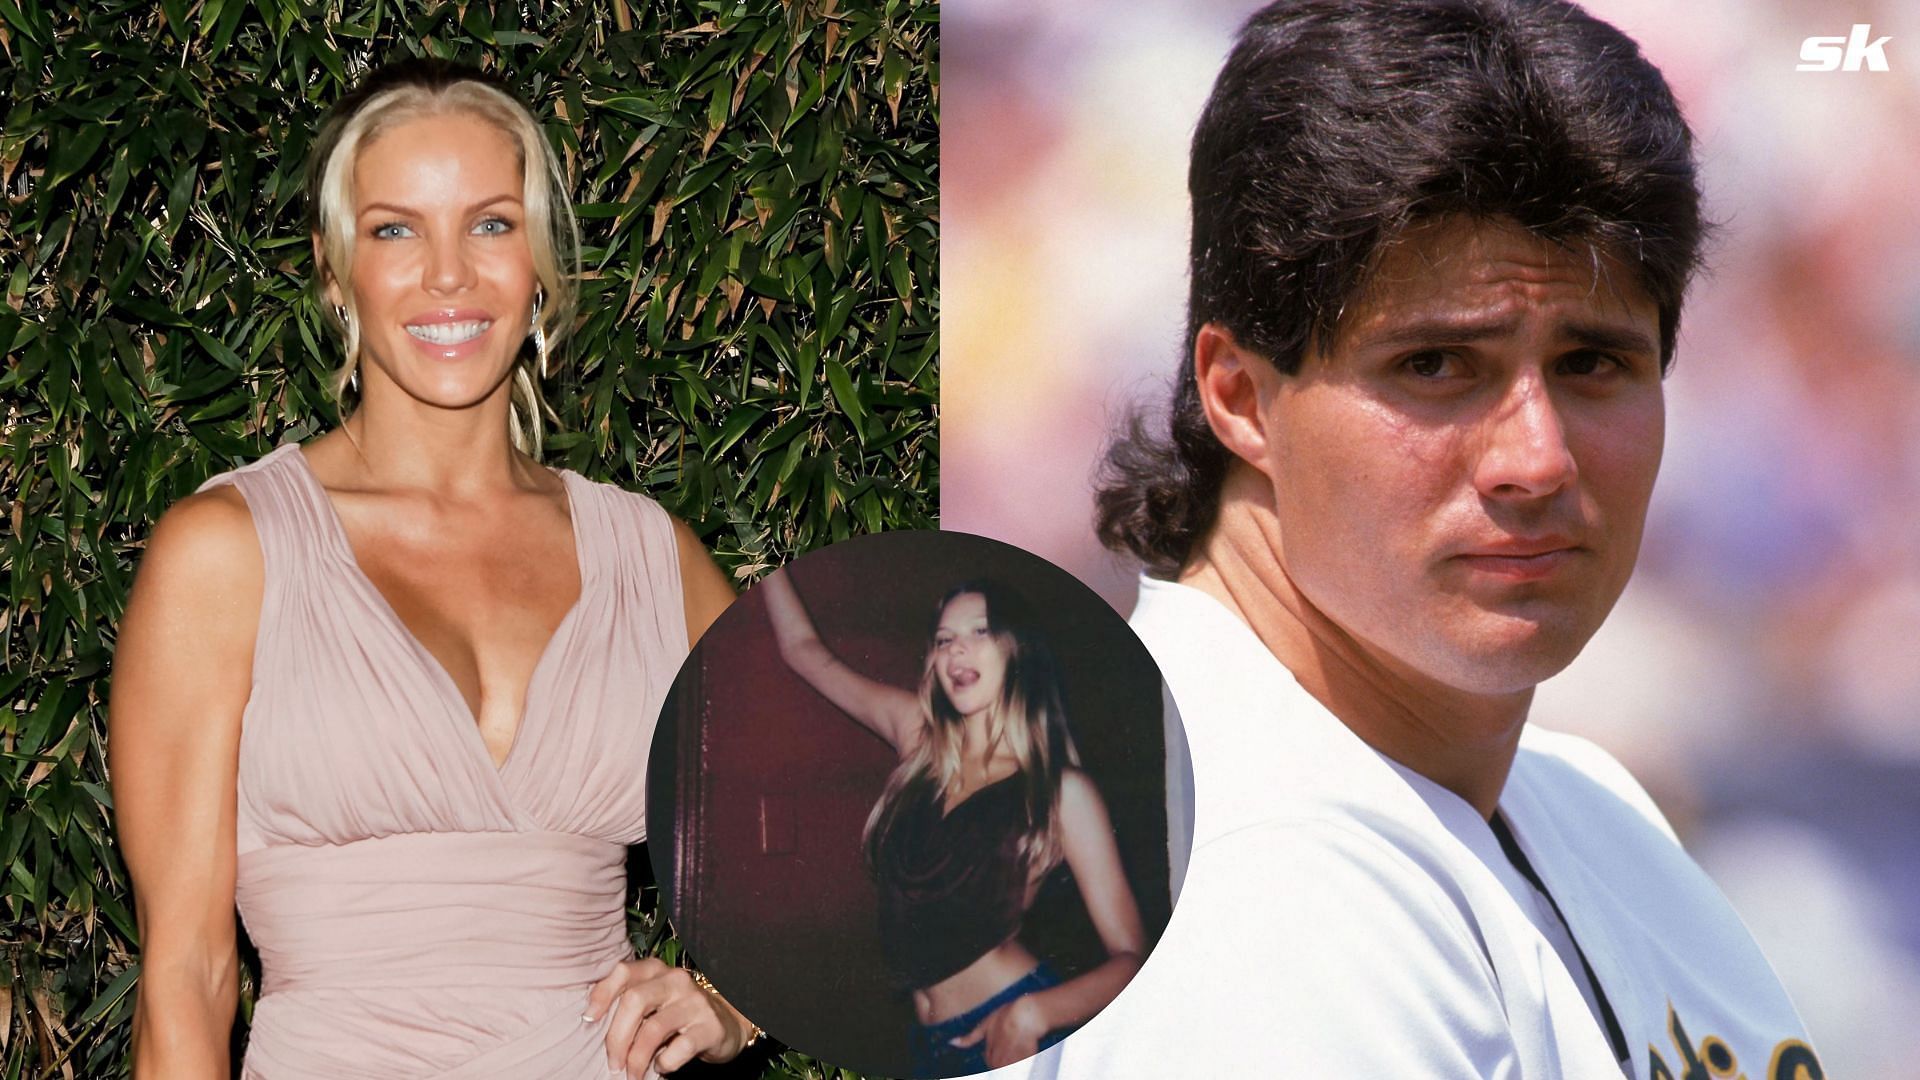 Jose Canseco's daughter Josie: Ex-MLB star blew our 'family money